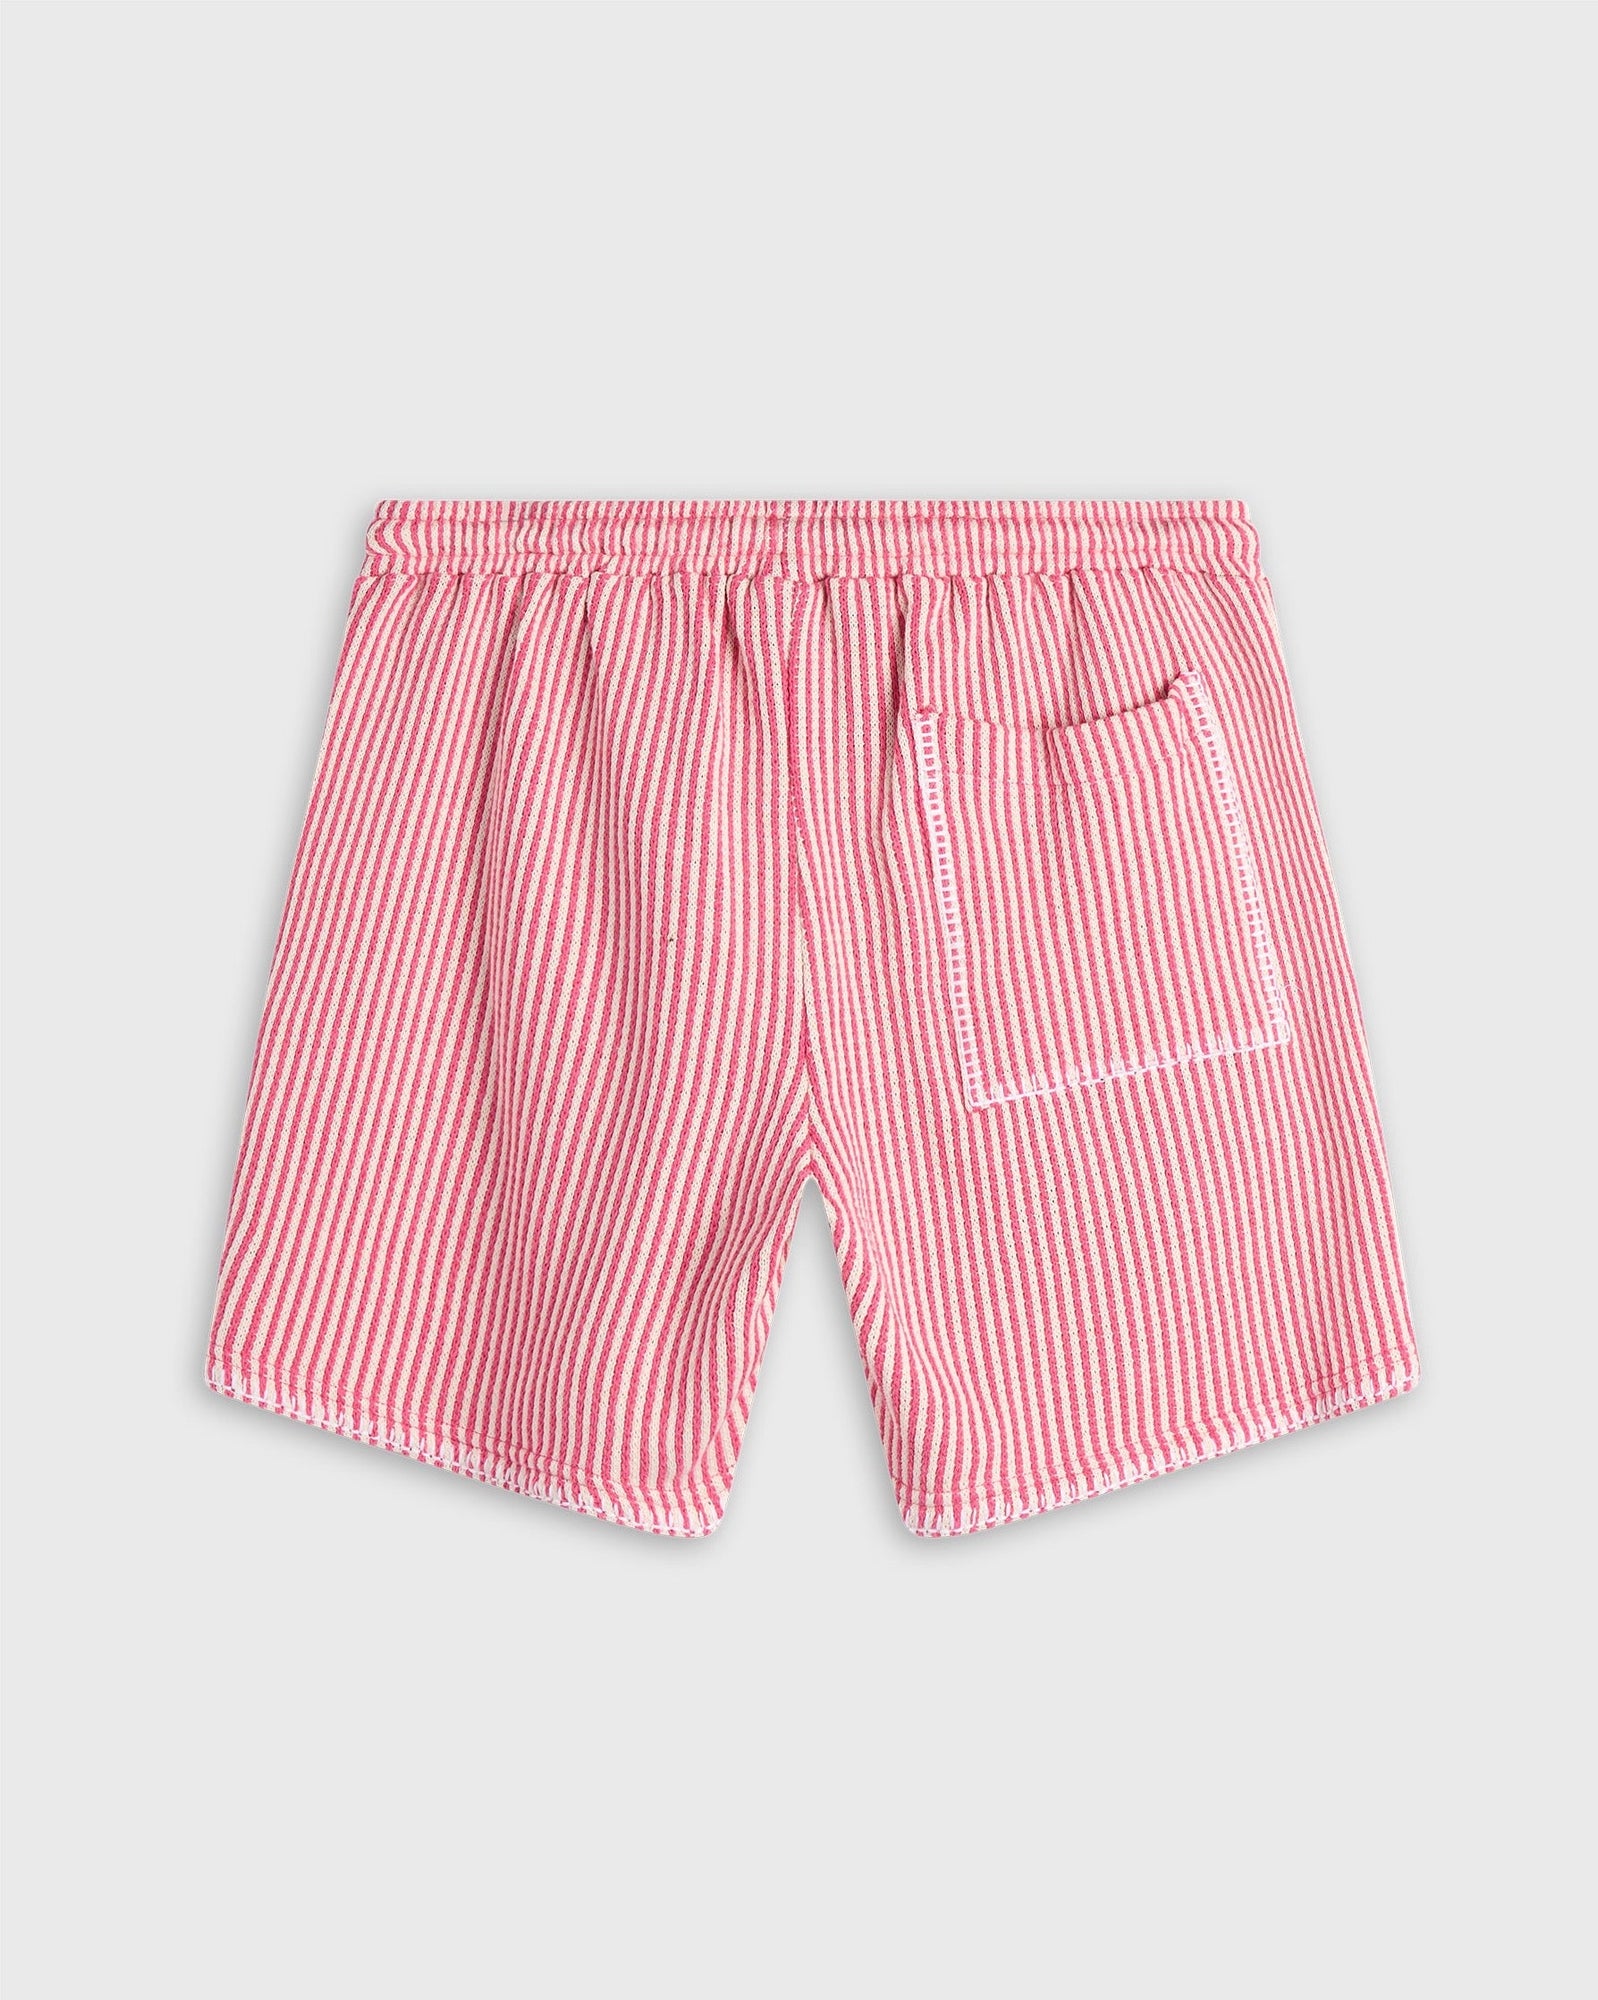 Red and pink striped textured short- unisex fashion bottoms for men & women by Krost.